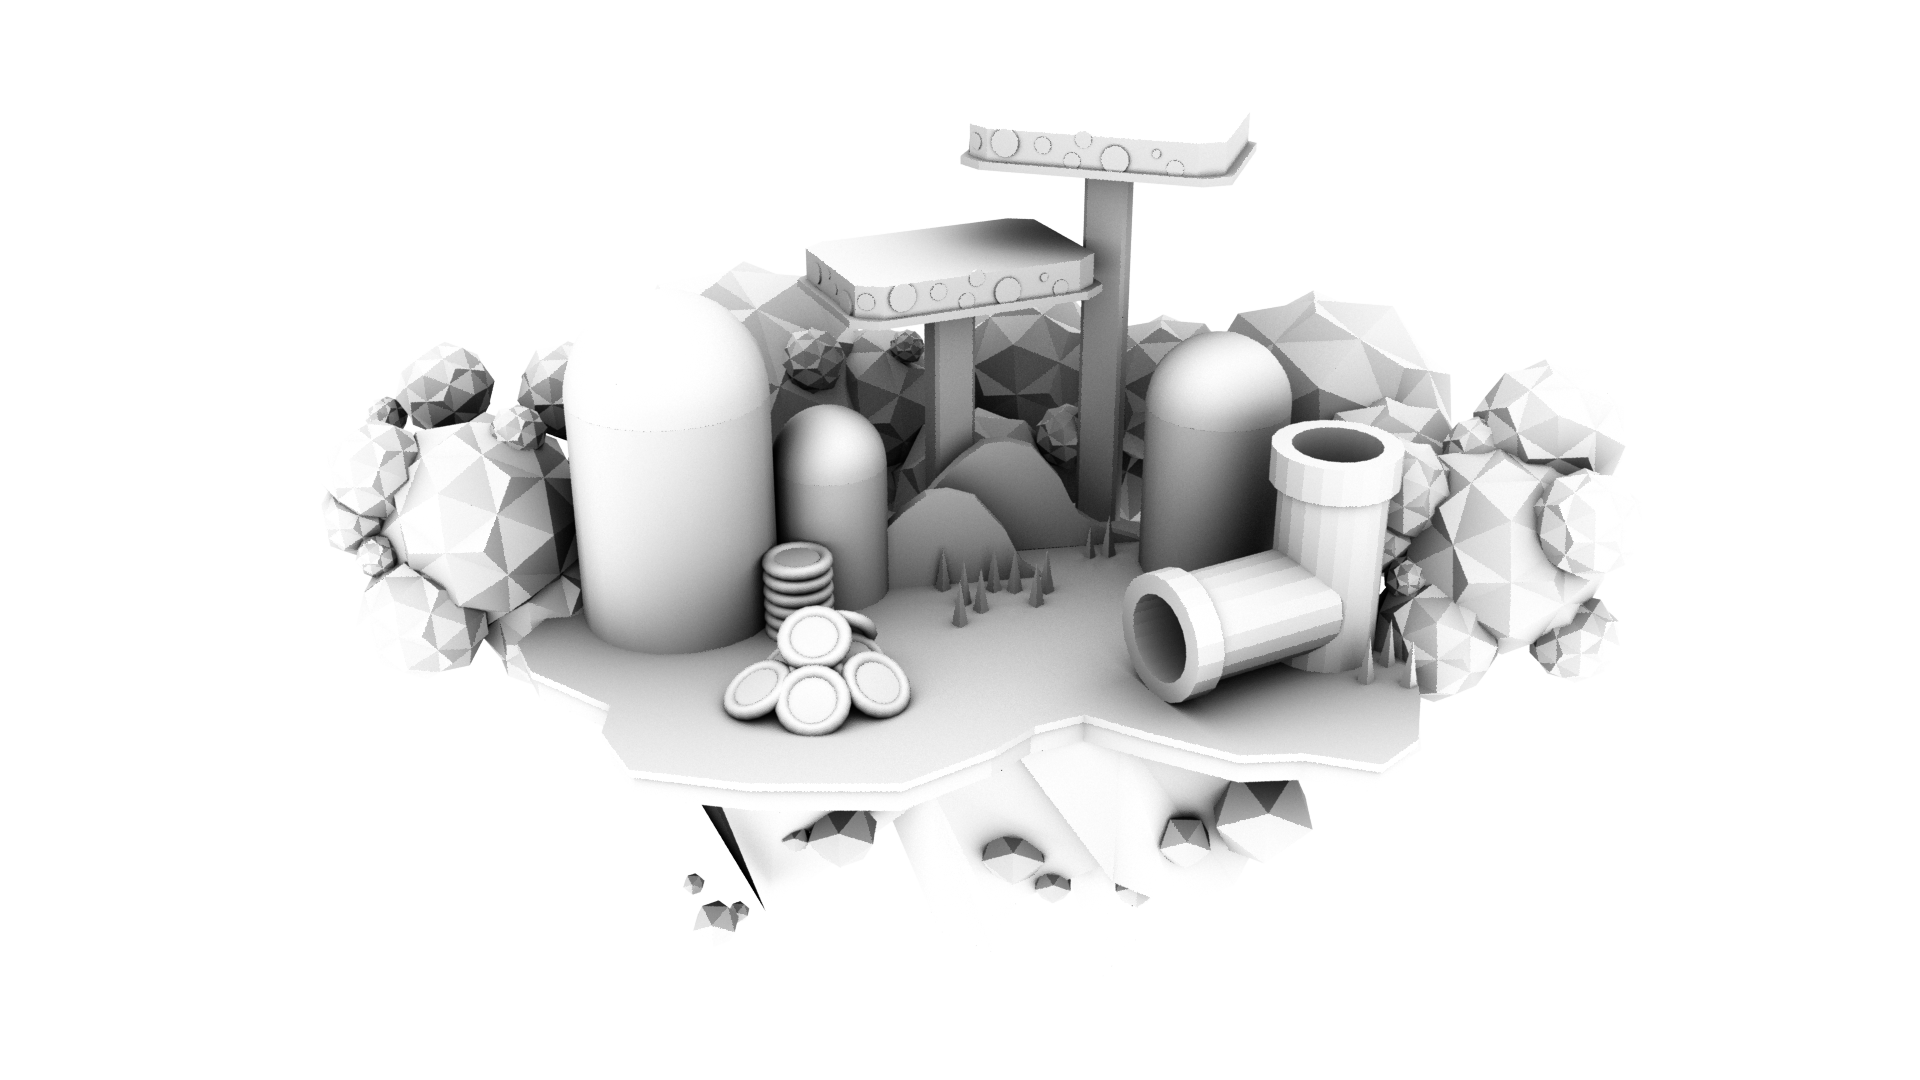 The occlusion layer of Jameson's low-poly 3D model island